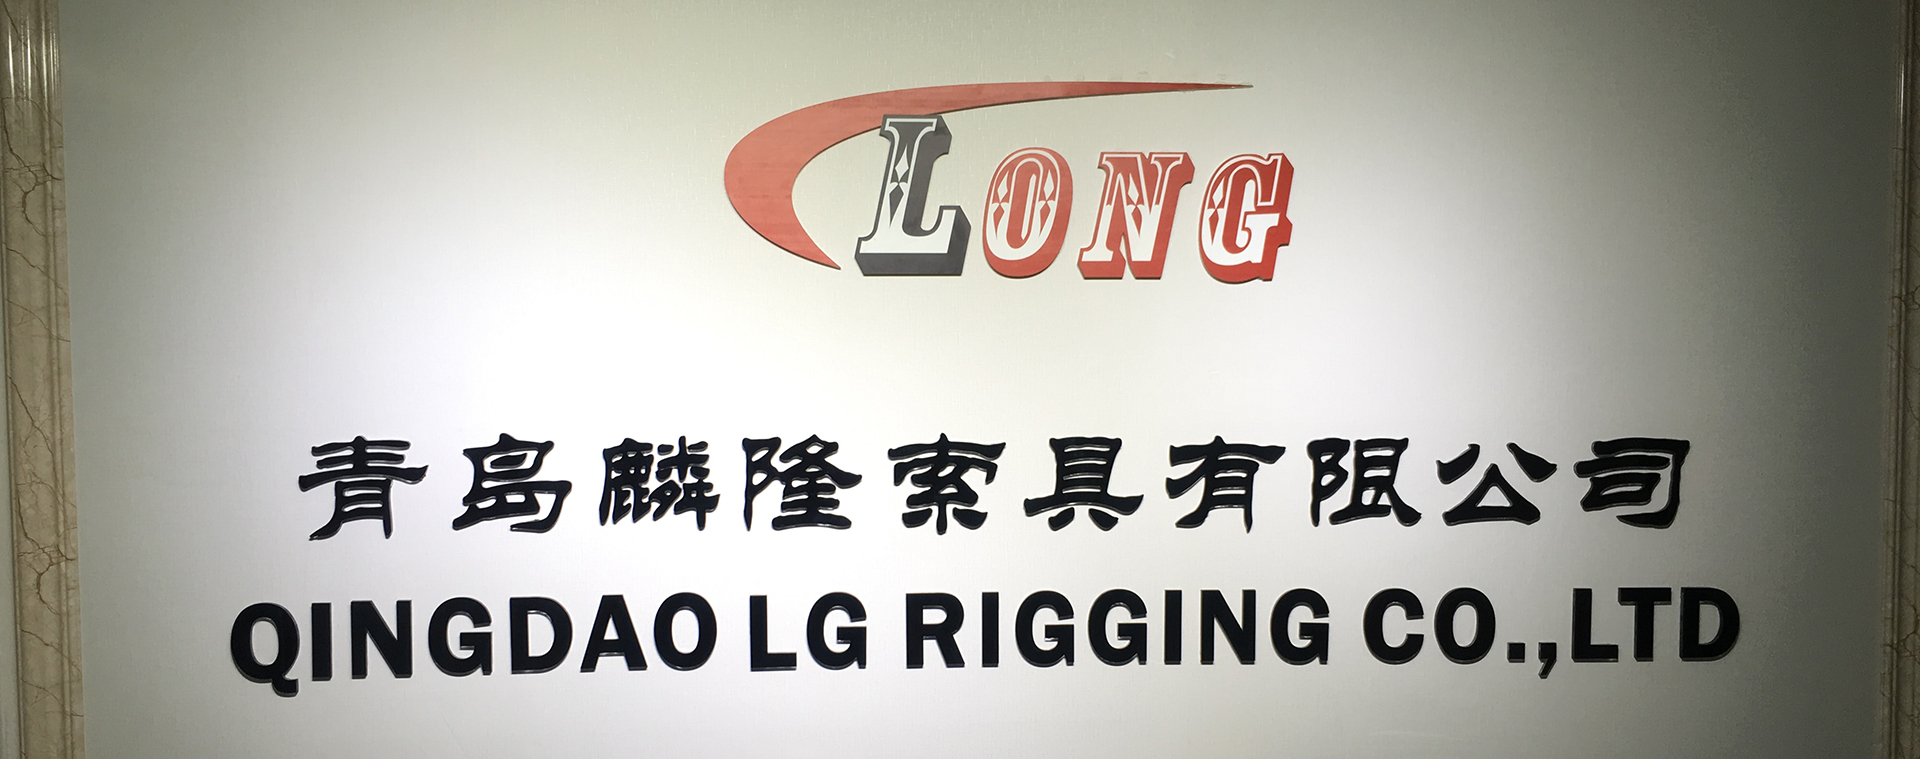 About Lifting and Rigging Supplies Company LG RIGGING®